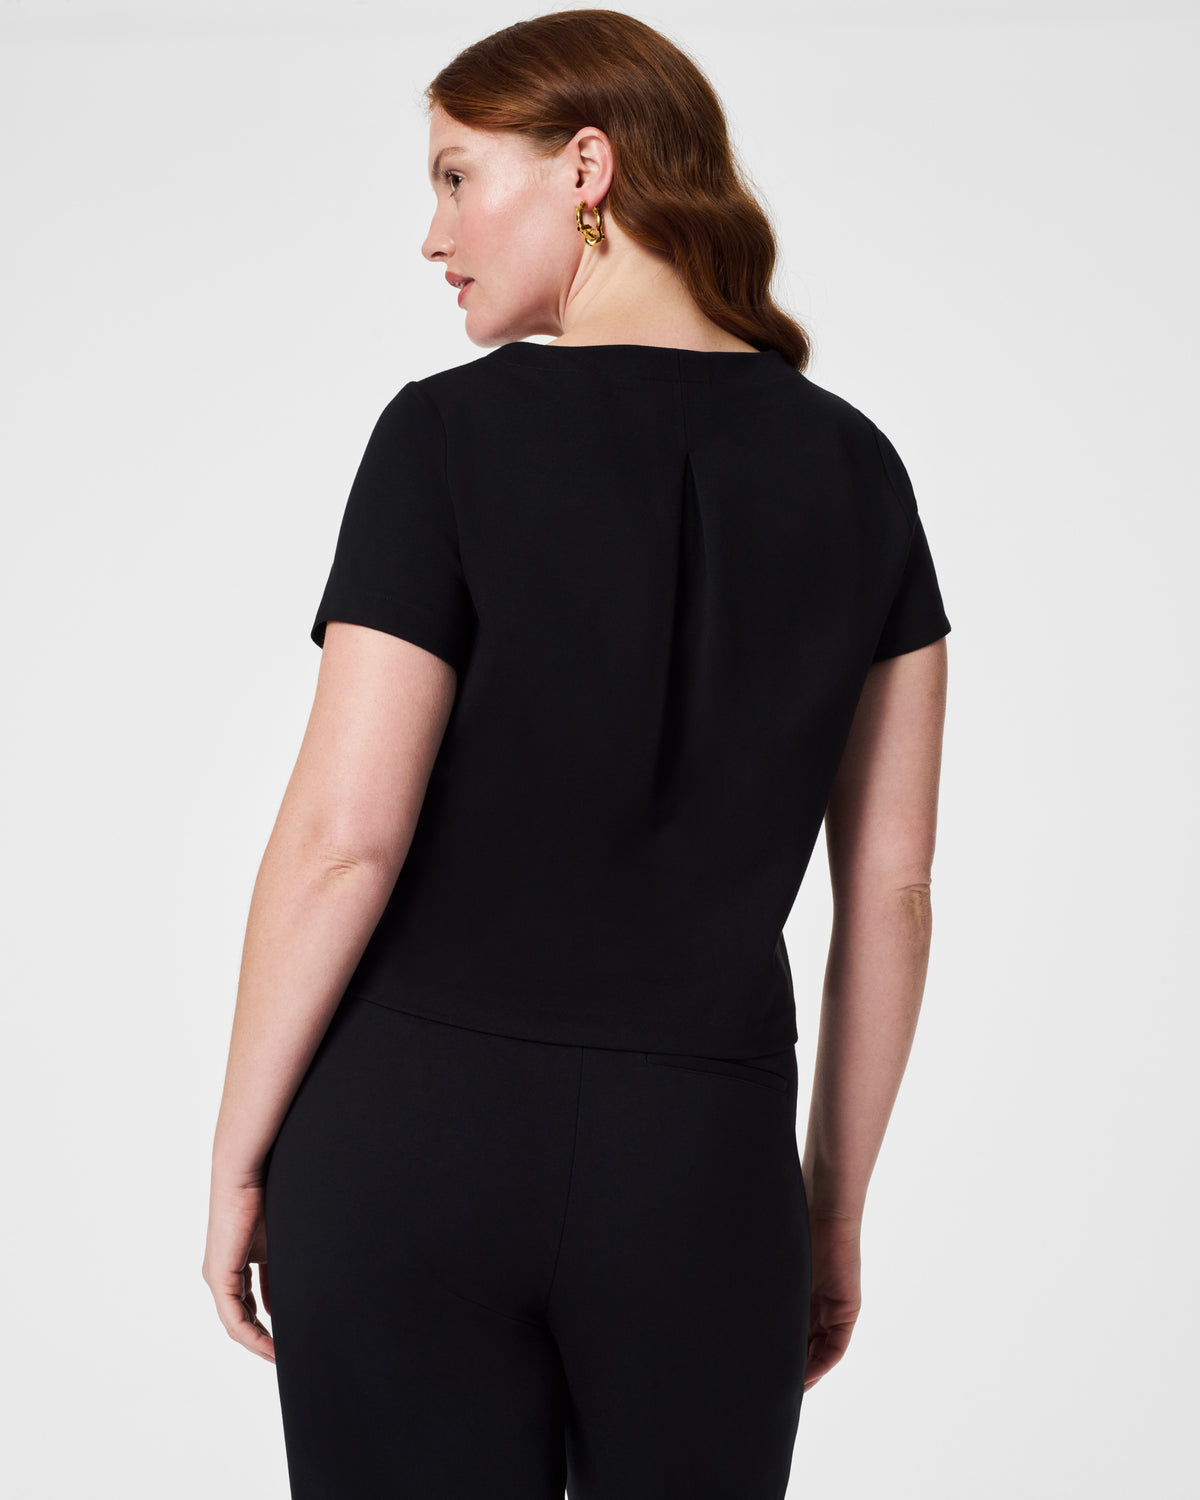 The Perfect Pleated Back Top in Black